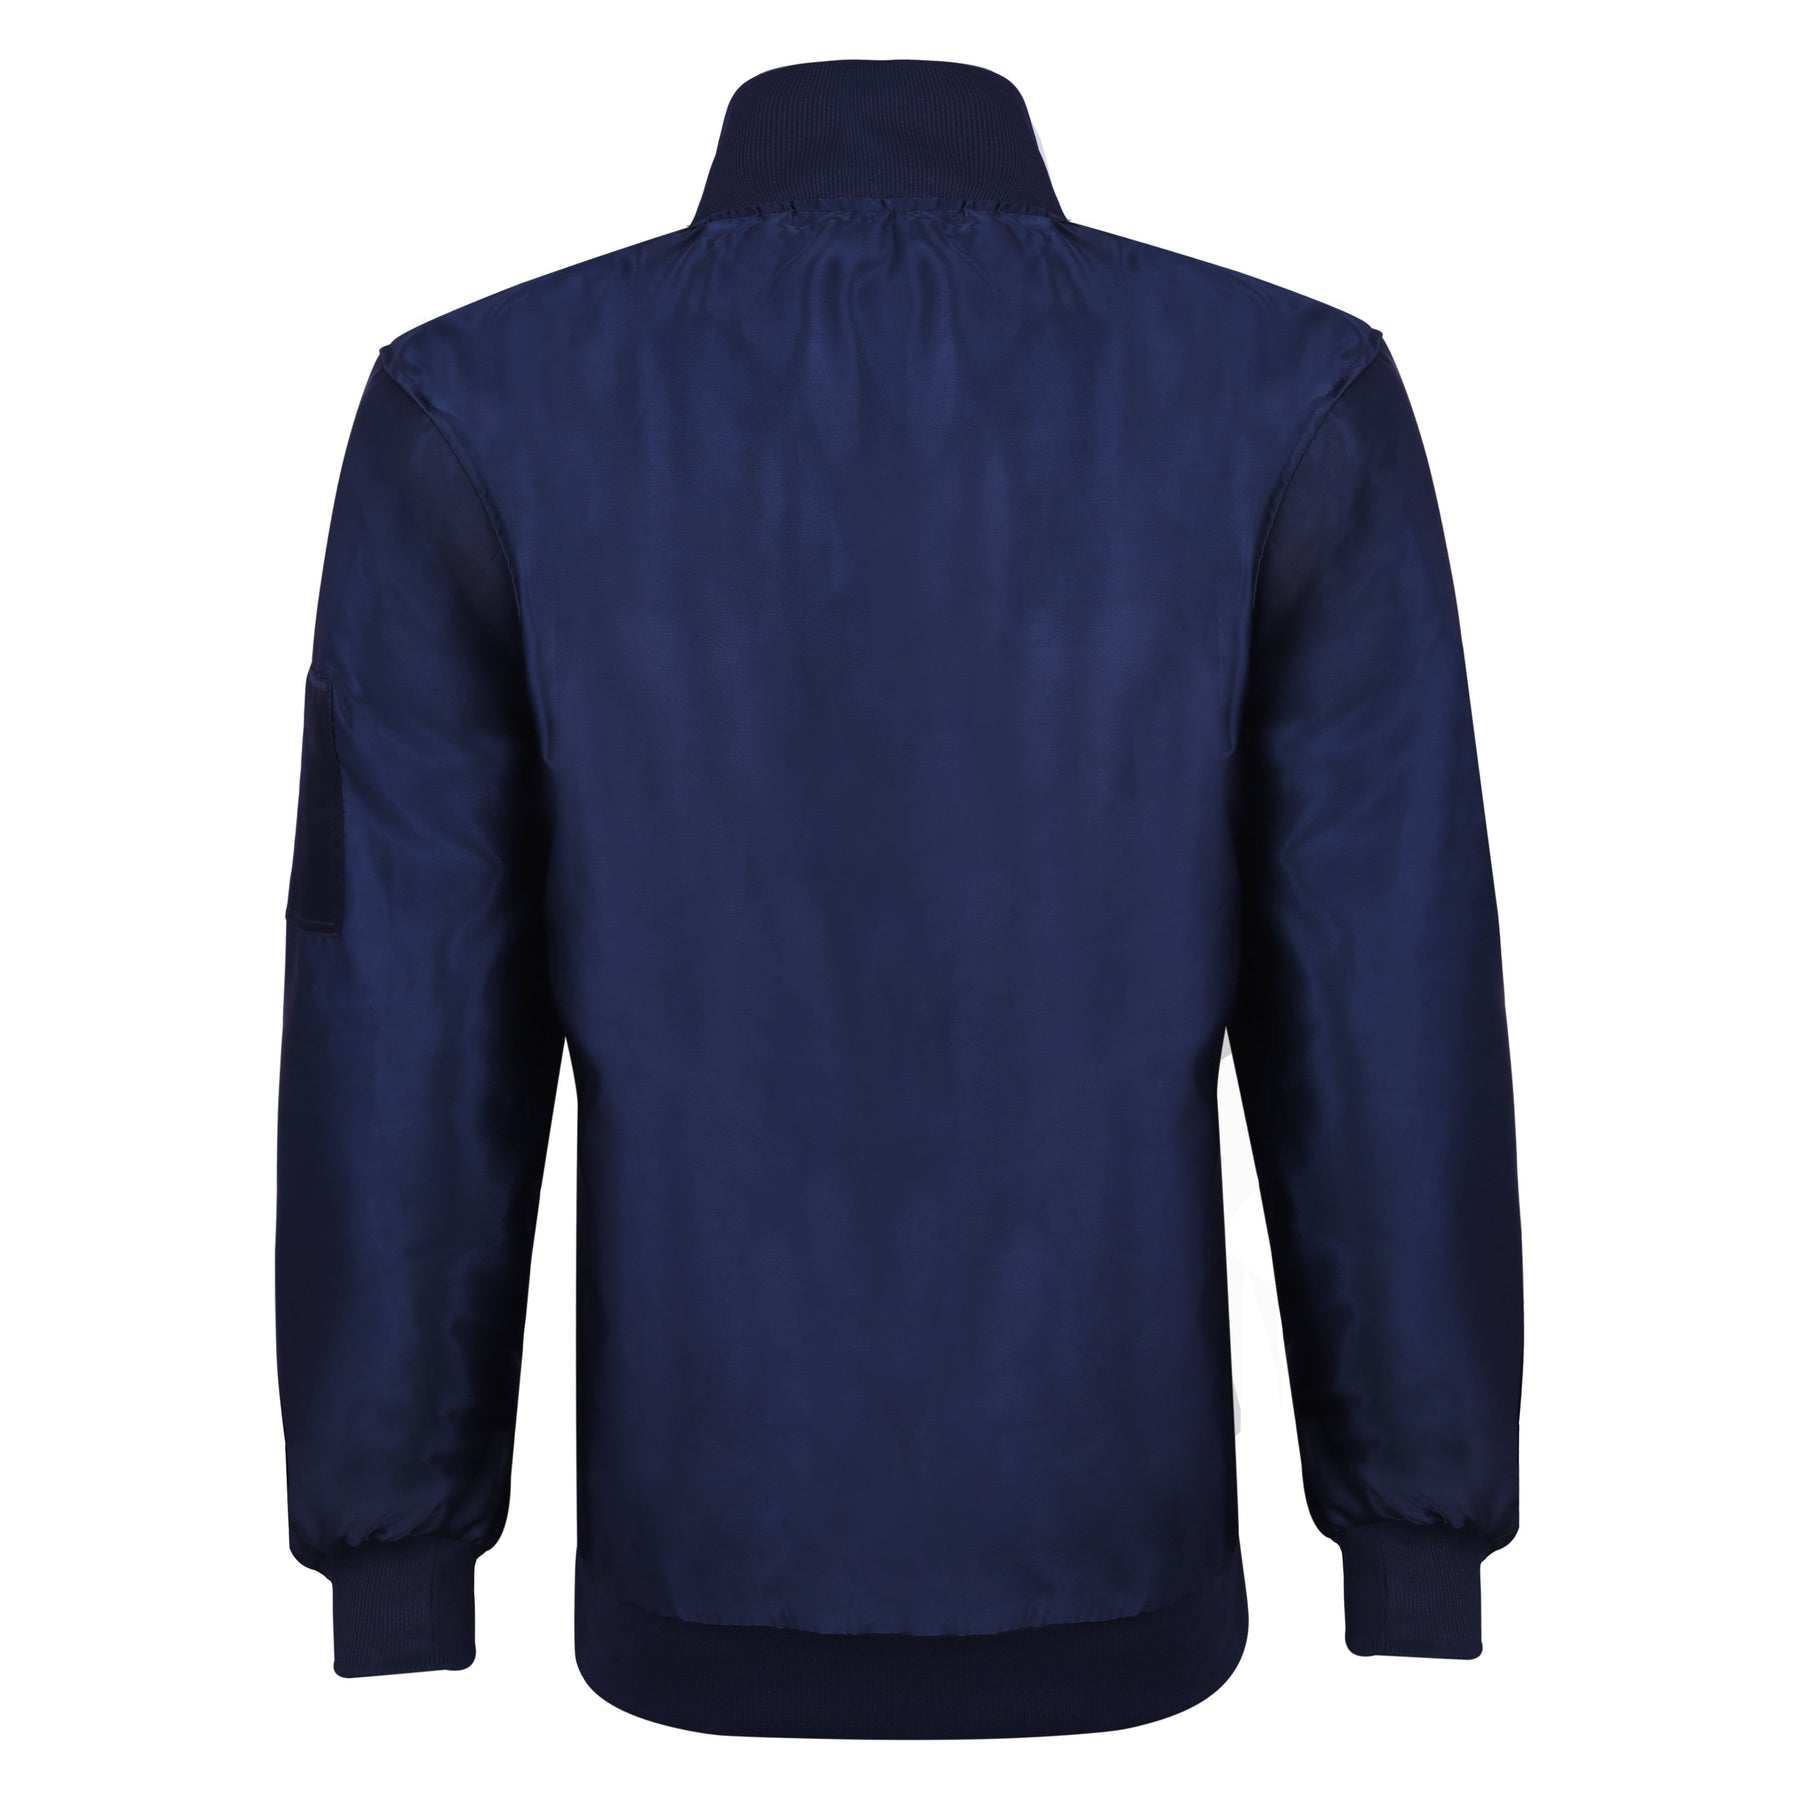 OES Jacket - Nylon Blue Color With Gold Embroidery - Bricks Masons